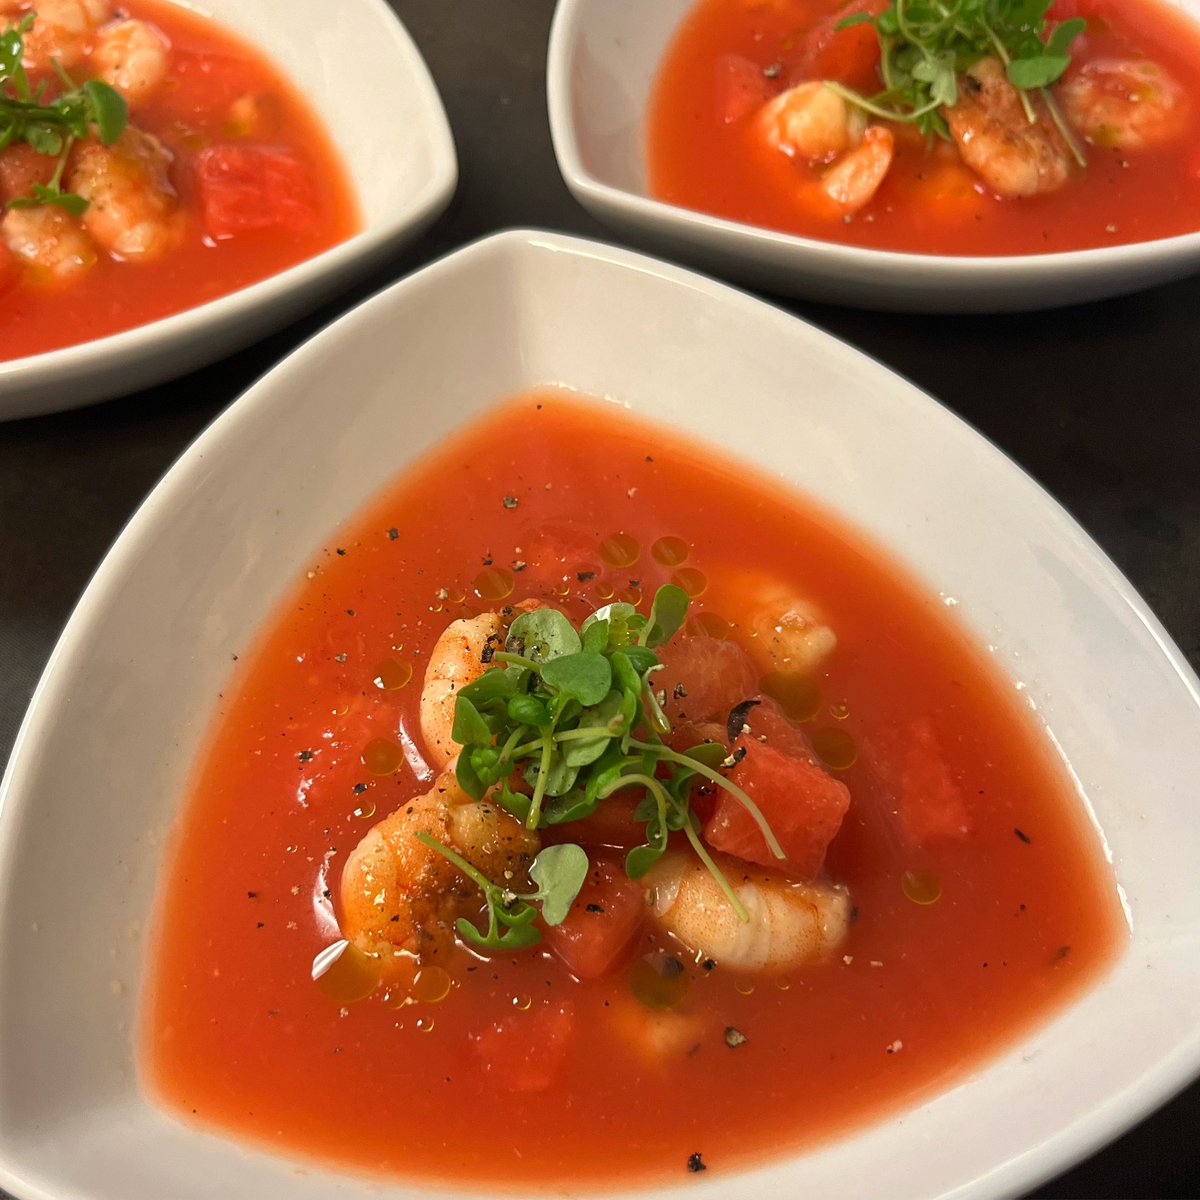 Summer in a bowl - One of tonight’s private party starter.
King Prawns in a Melon Gazpacho with micro basil & herb oil.

A not so classic cold soup as fresh watermelon is the base, but perfect for one of the hottest days of the year.

#gazpacho #coldsoup #privateparty